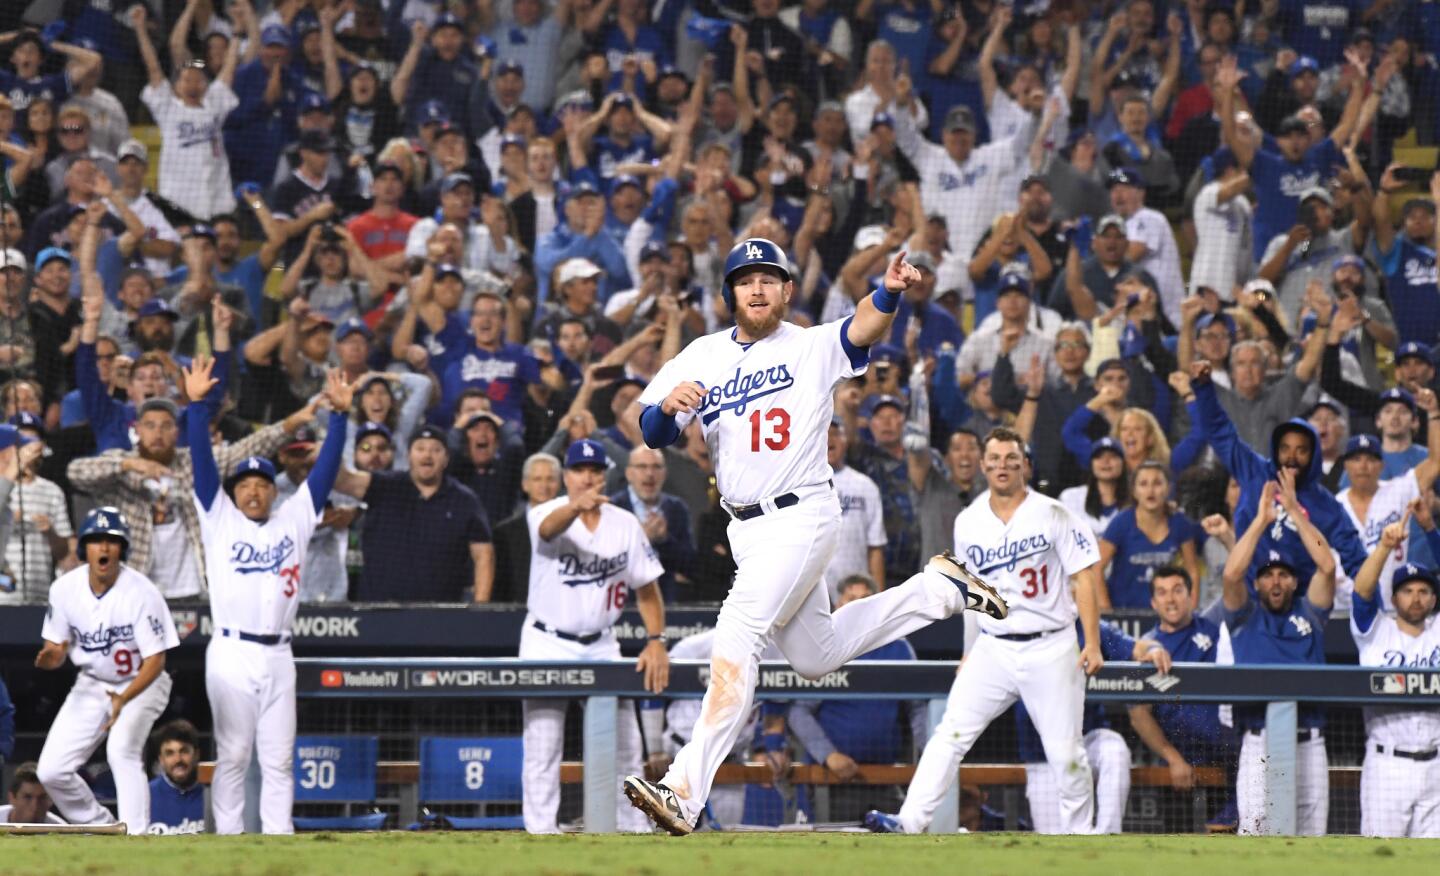 Dodgers Max Muncy scores the tying run on an error by the Red Sox in the 13th inning.